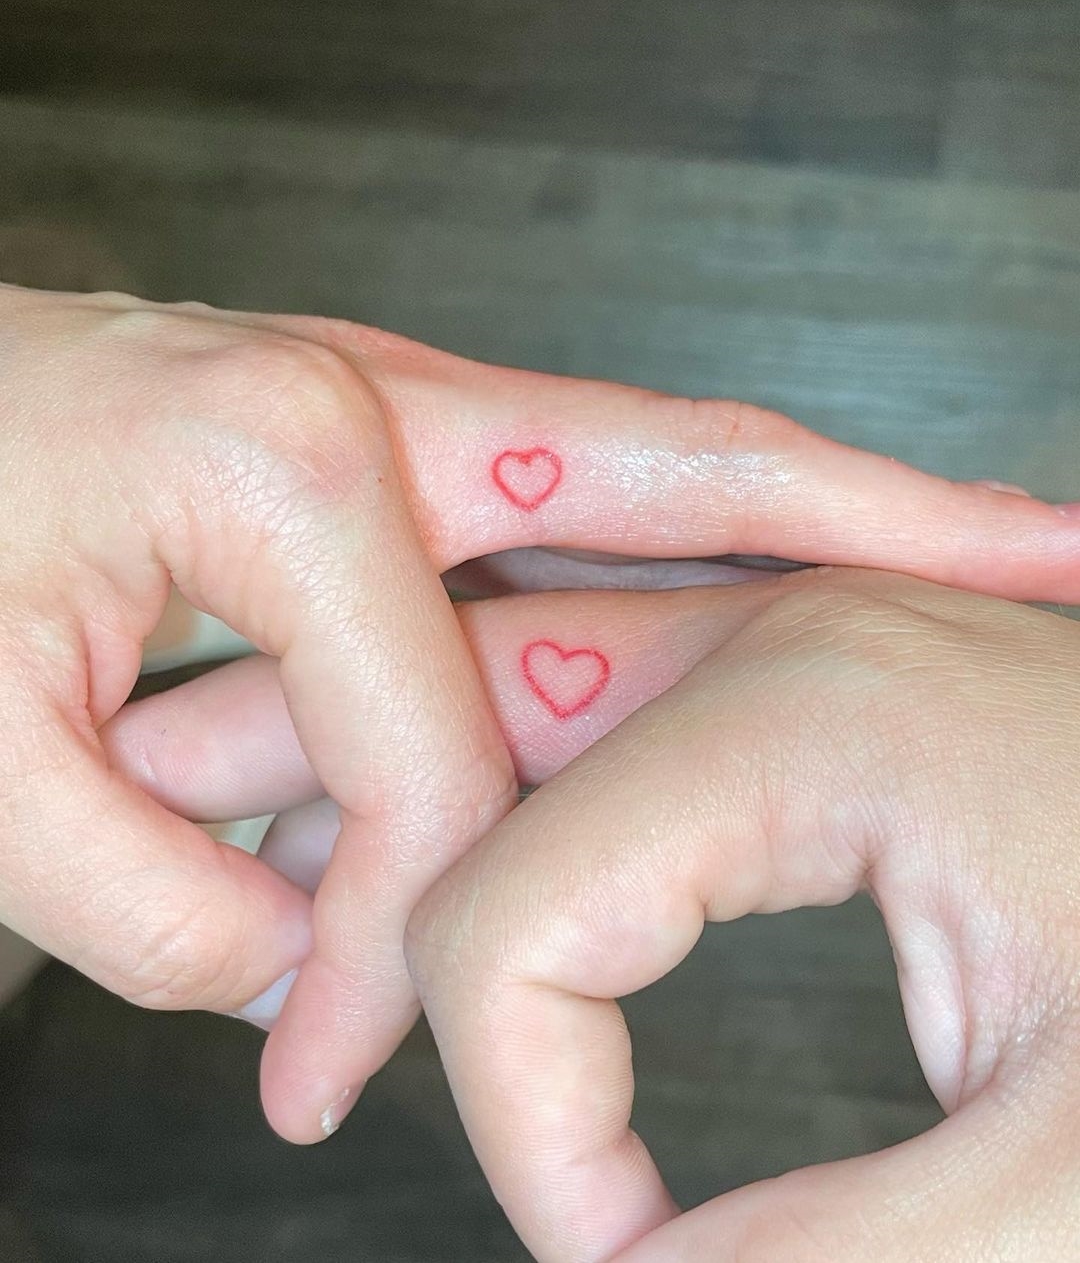 Tiny Red Heart Tattoos on Middle Fingers